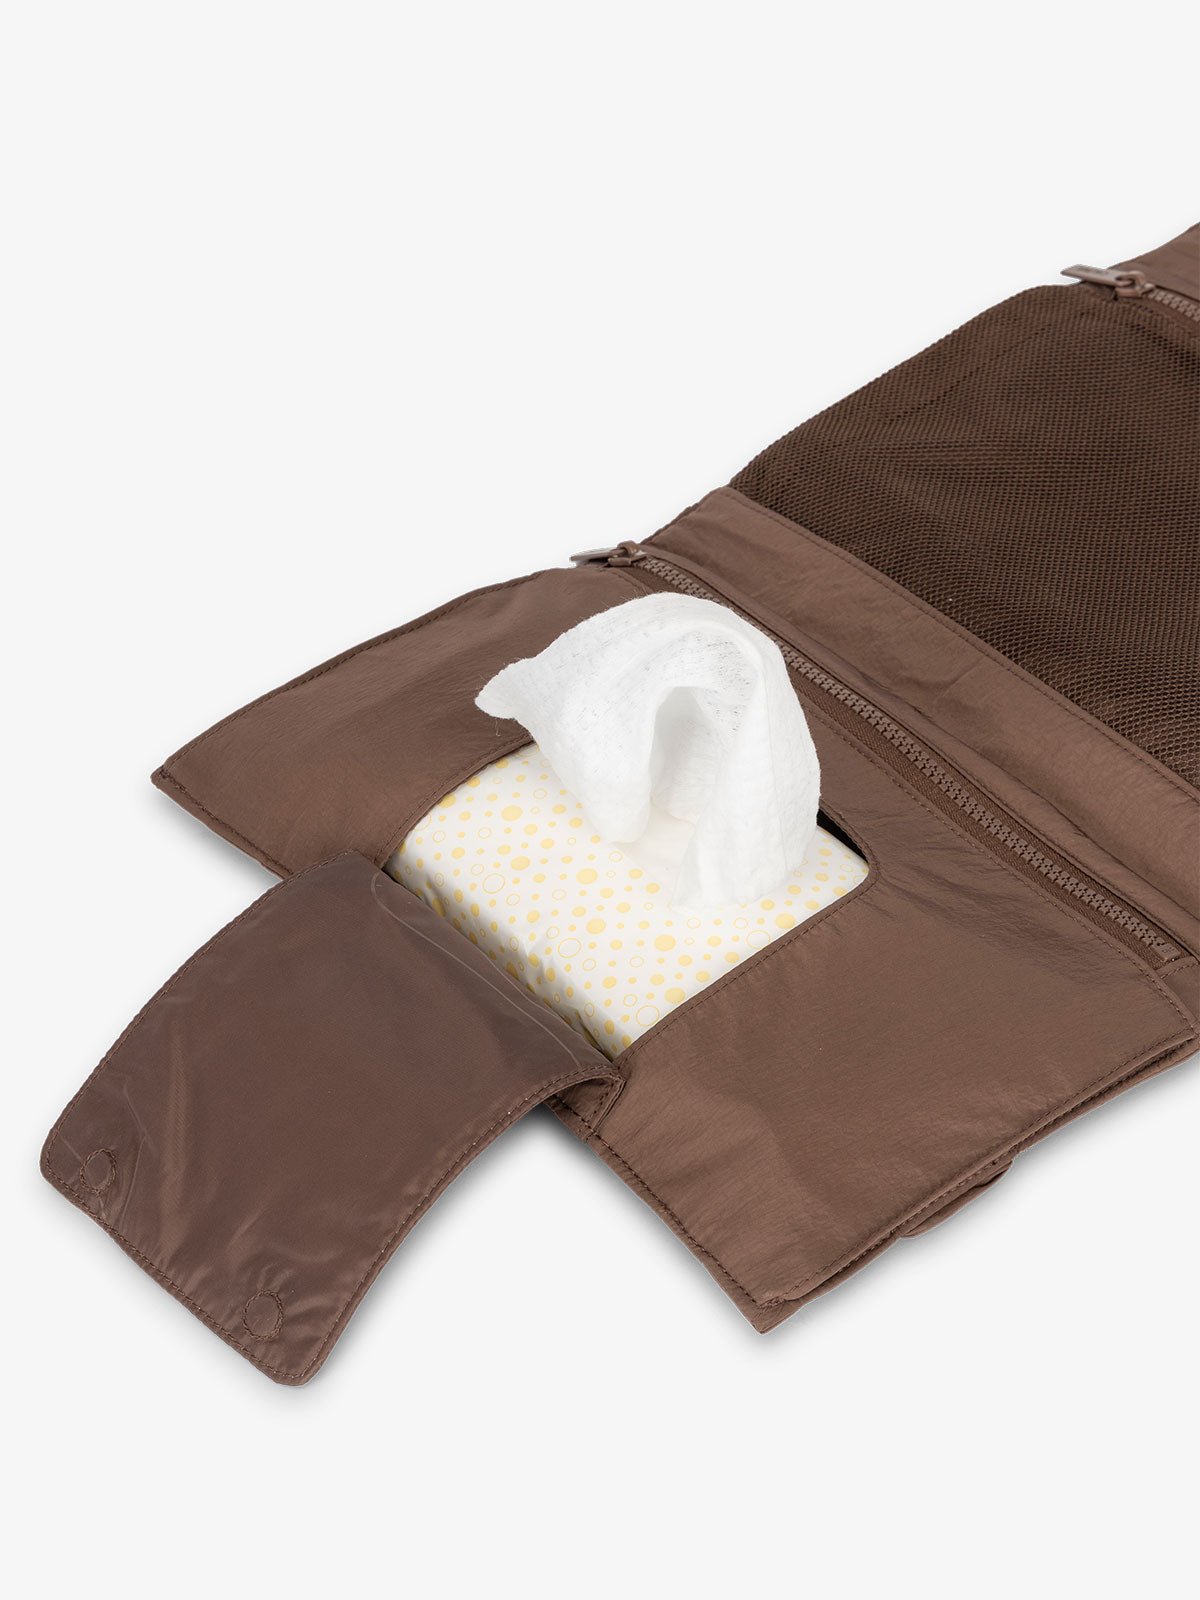 CALPAK portable changing pad clutch with dedicated baby wipe pocket in hazelnut brown